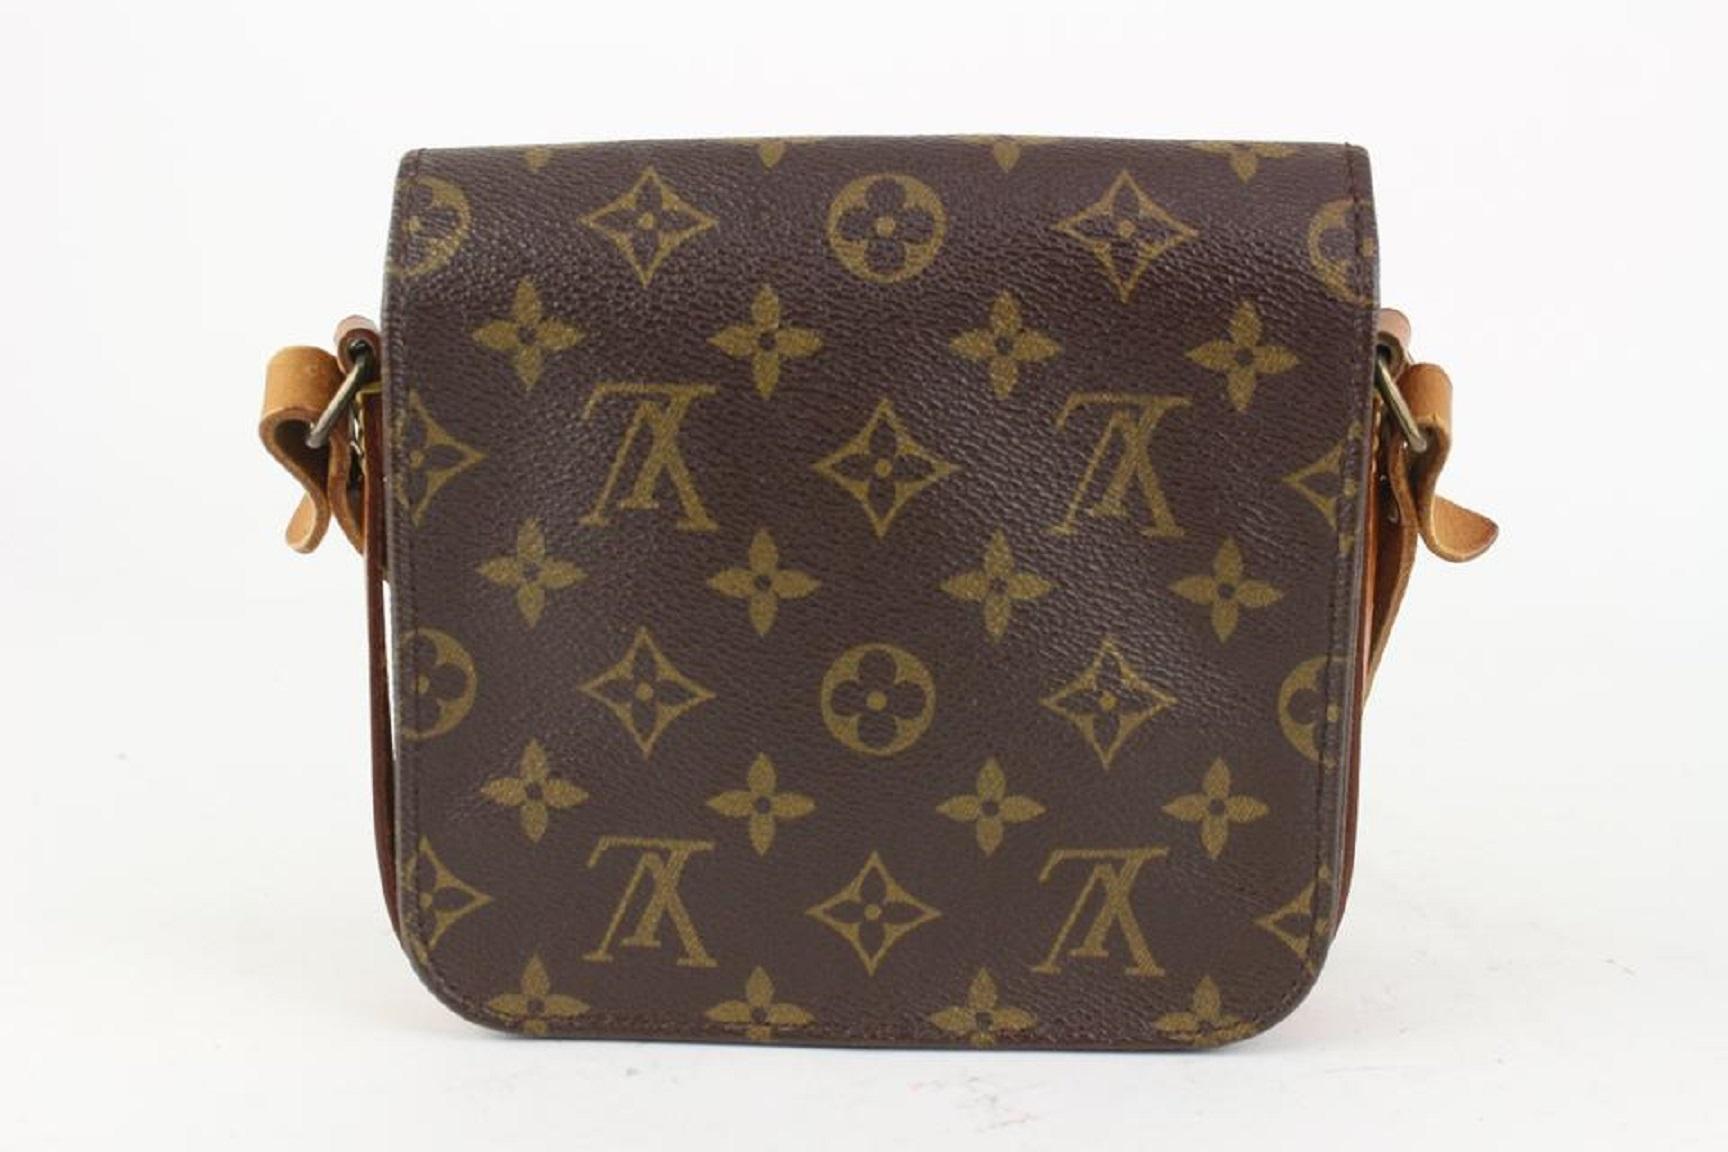 Louis Vuitton Monogram Mini Cartouchiere PM Crossbody Bag 1013lv8 In Good Condition For Sale In Dix hills, NY